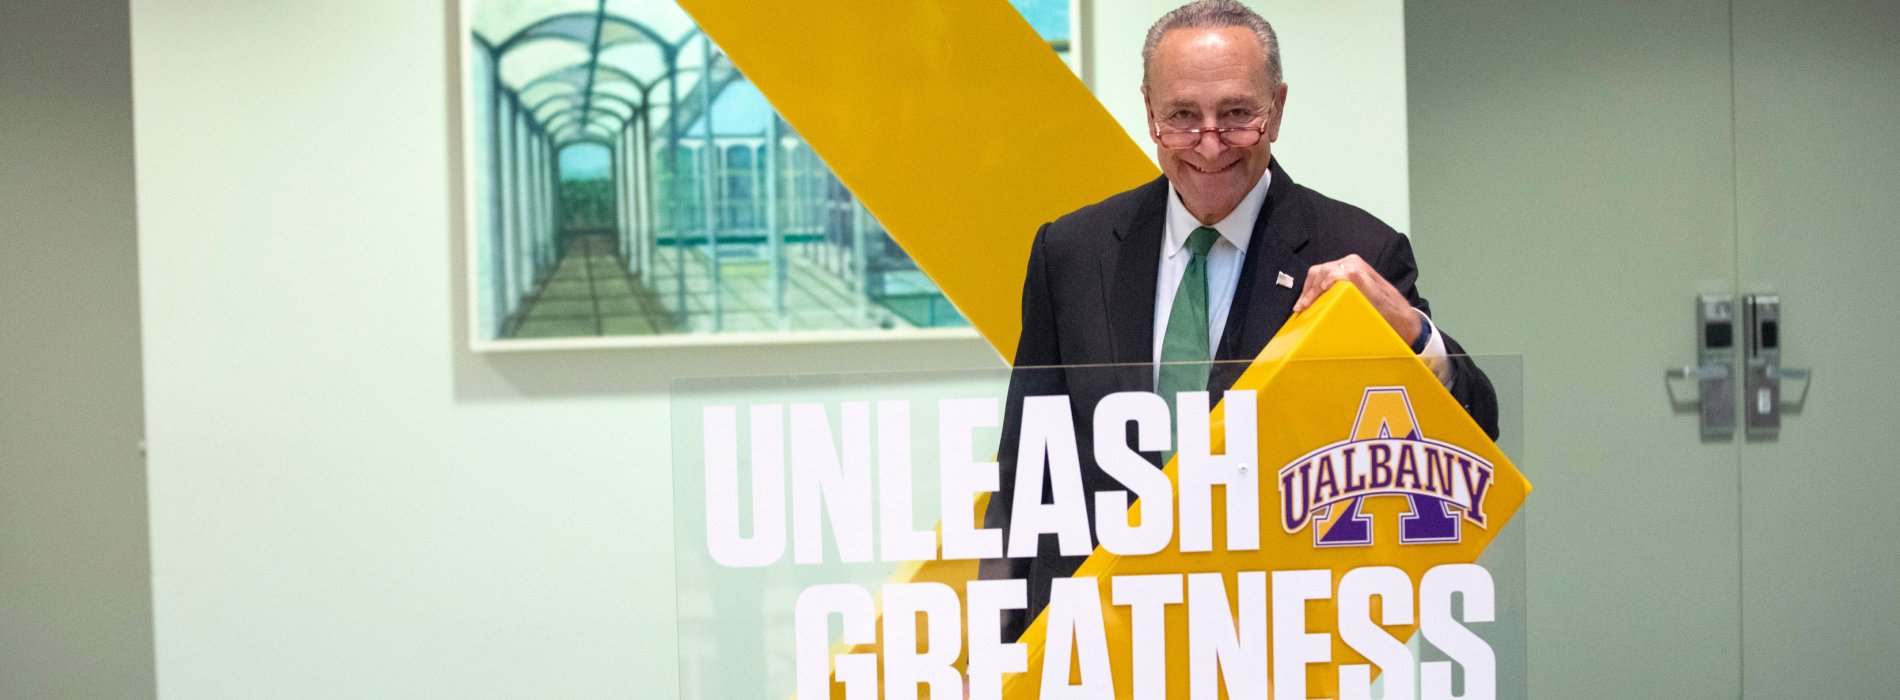 U.S. Senator Charles E. Schumer poses with an Unleash Greatness UAlbany sign.